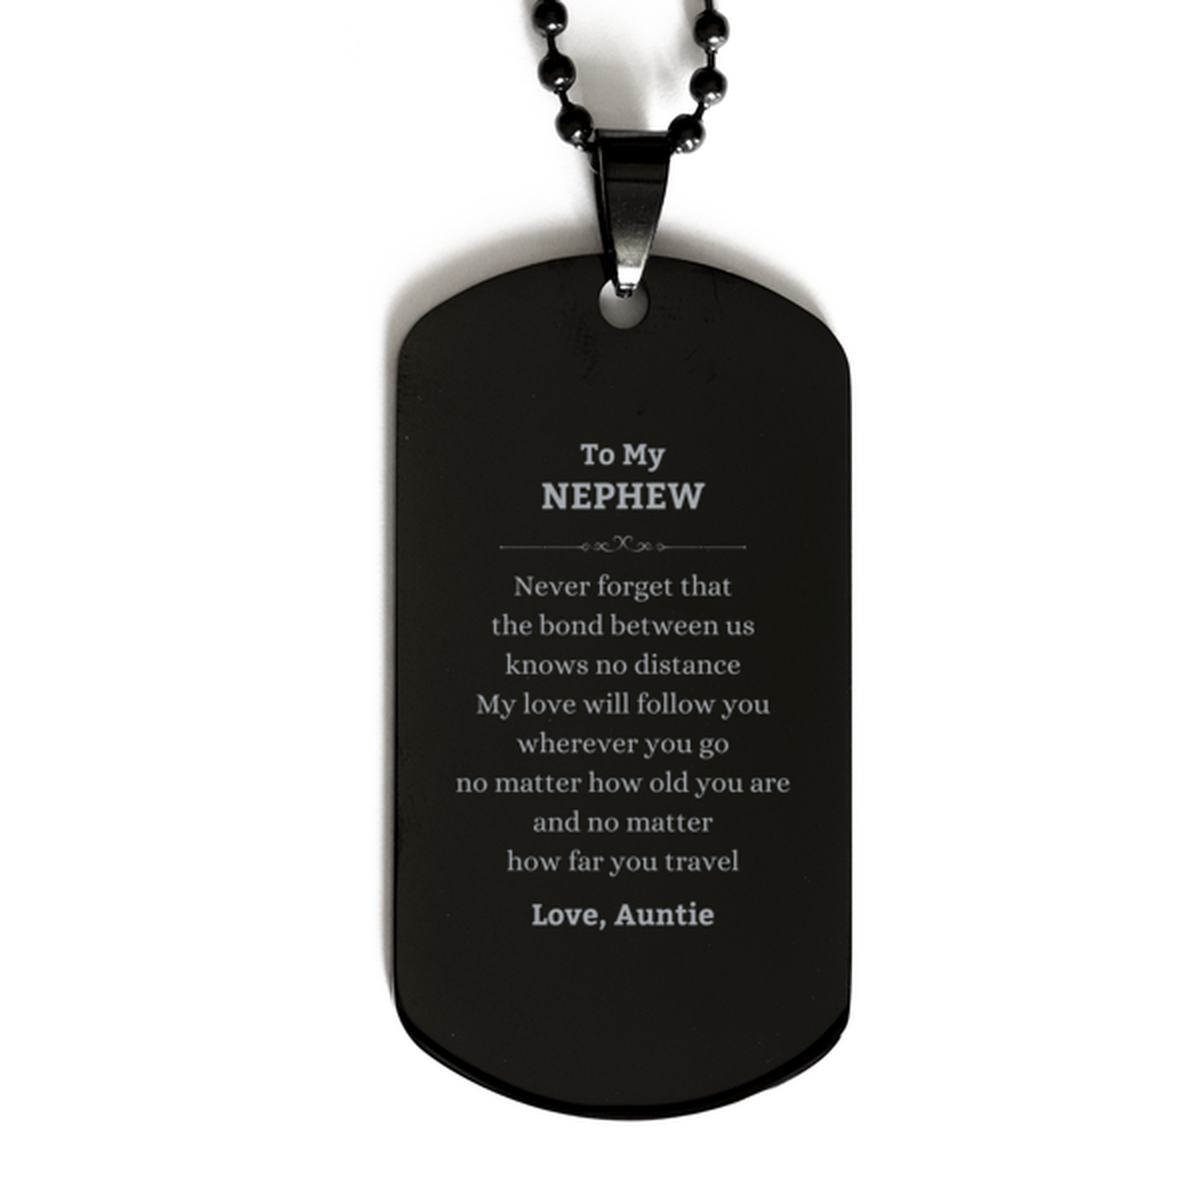 Nephew Birthday Gifts from Auntie, Adjustable Black Dog Tag for Nephew Christmas Graduation Unique Gifts Nephew Never forget that the bond between us knows no distance. Love, Auntie